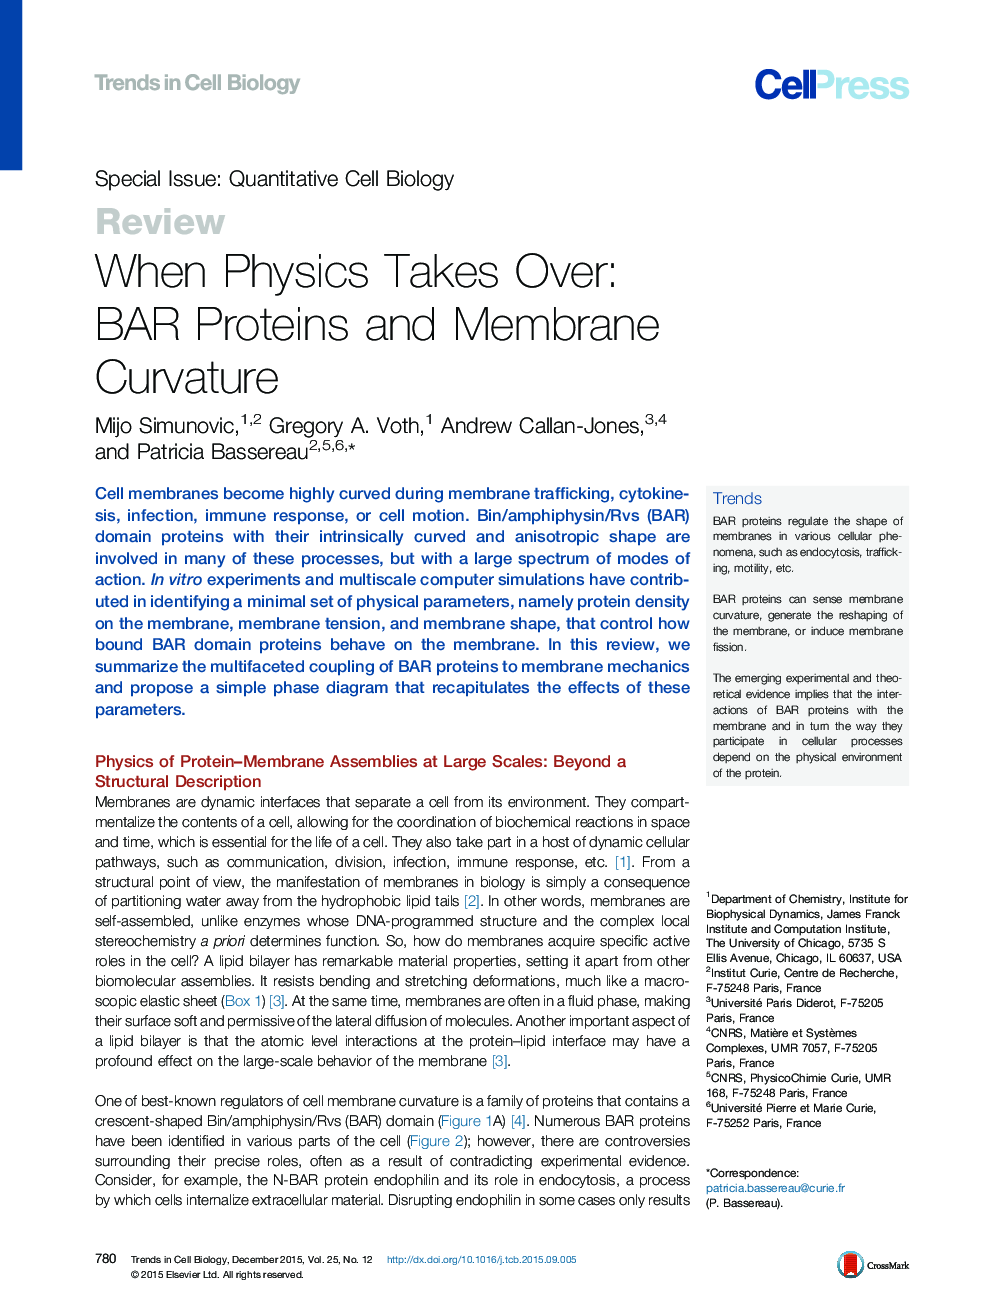 When Physics Takes Over: BAR Proteins and Membrane Curvature